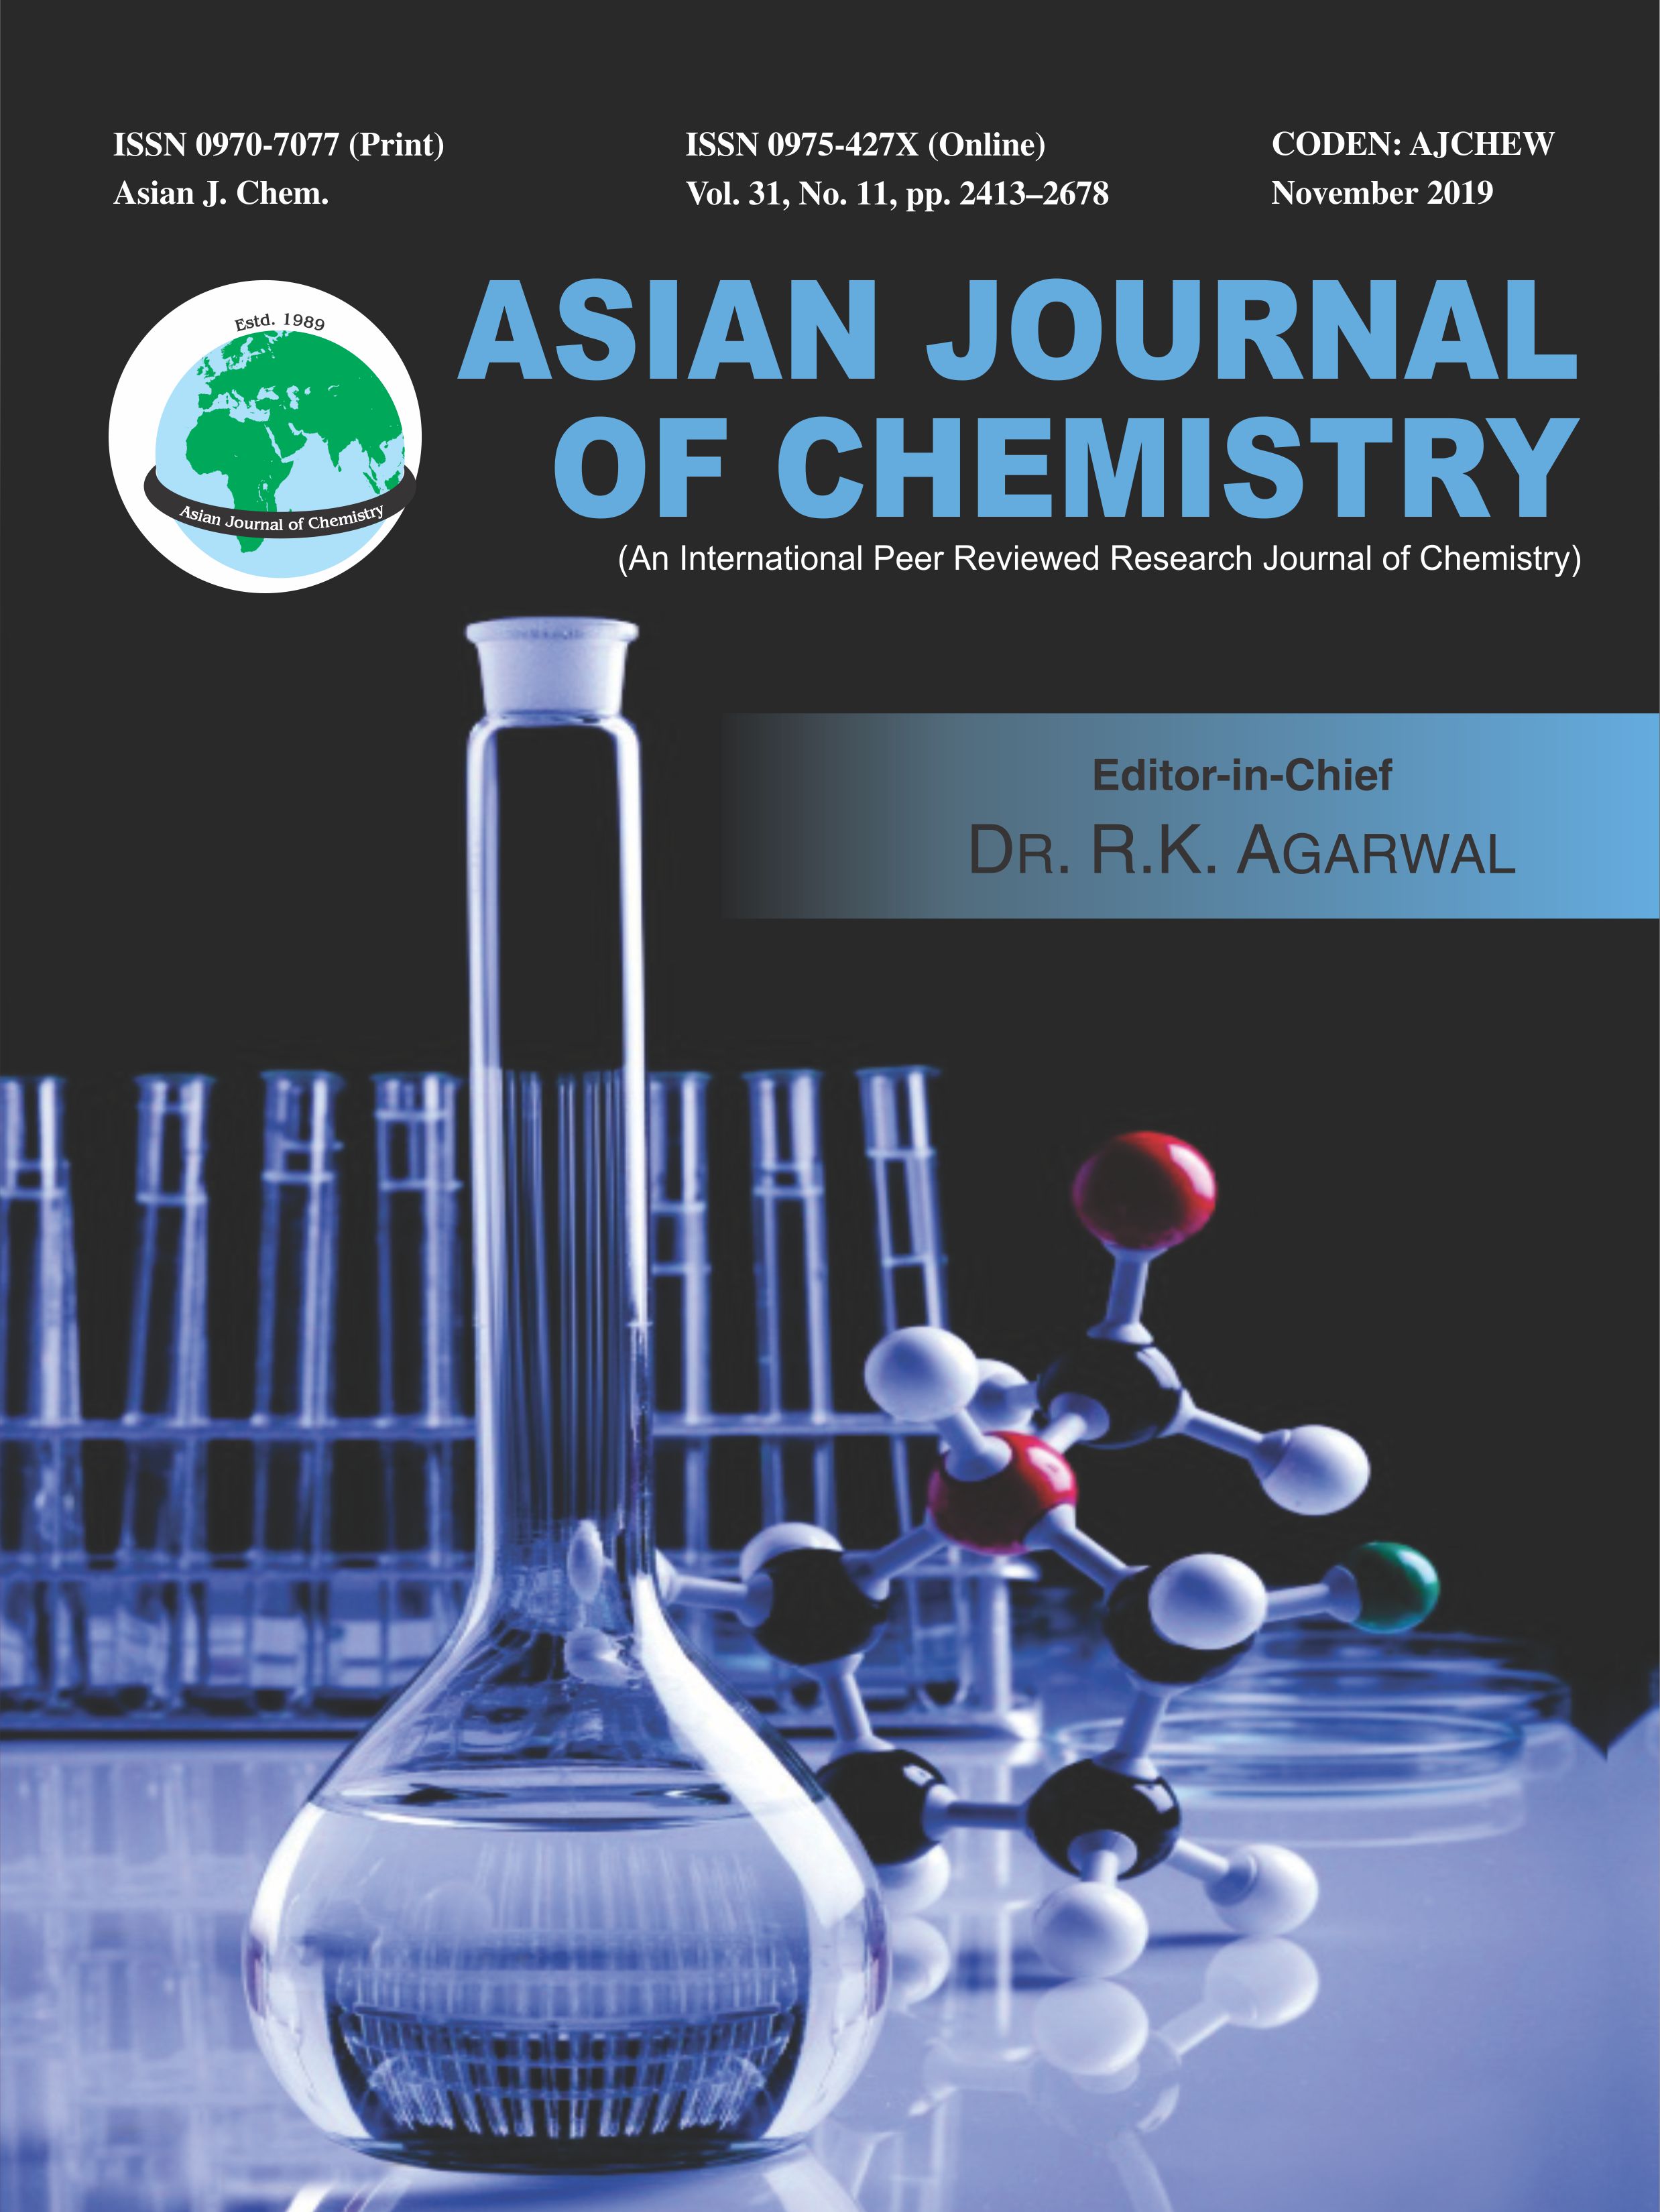 Asian Journal of Chemistry Impact Factor, Indexing, Acceptance rate